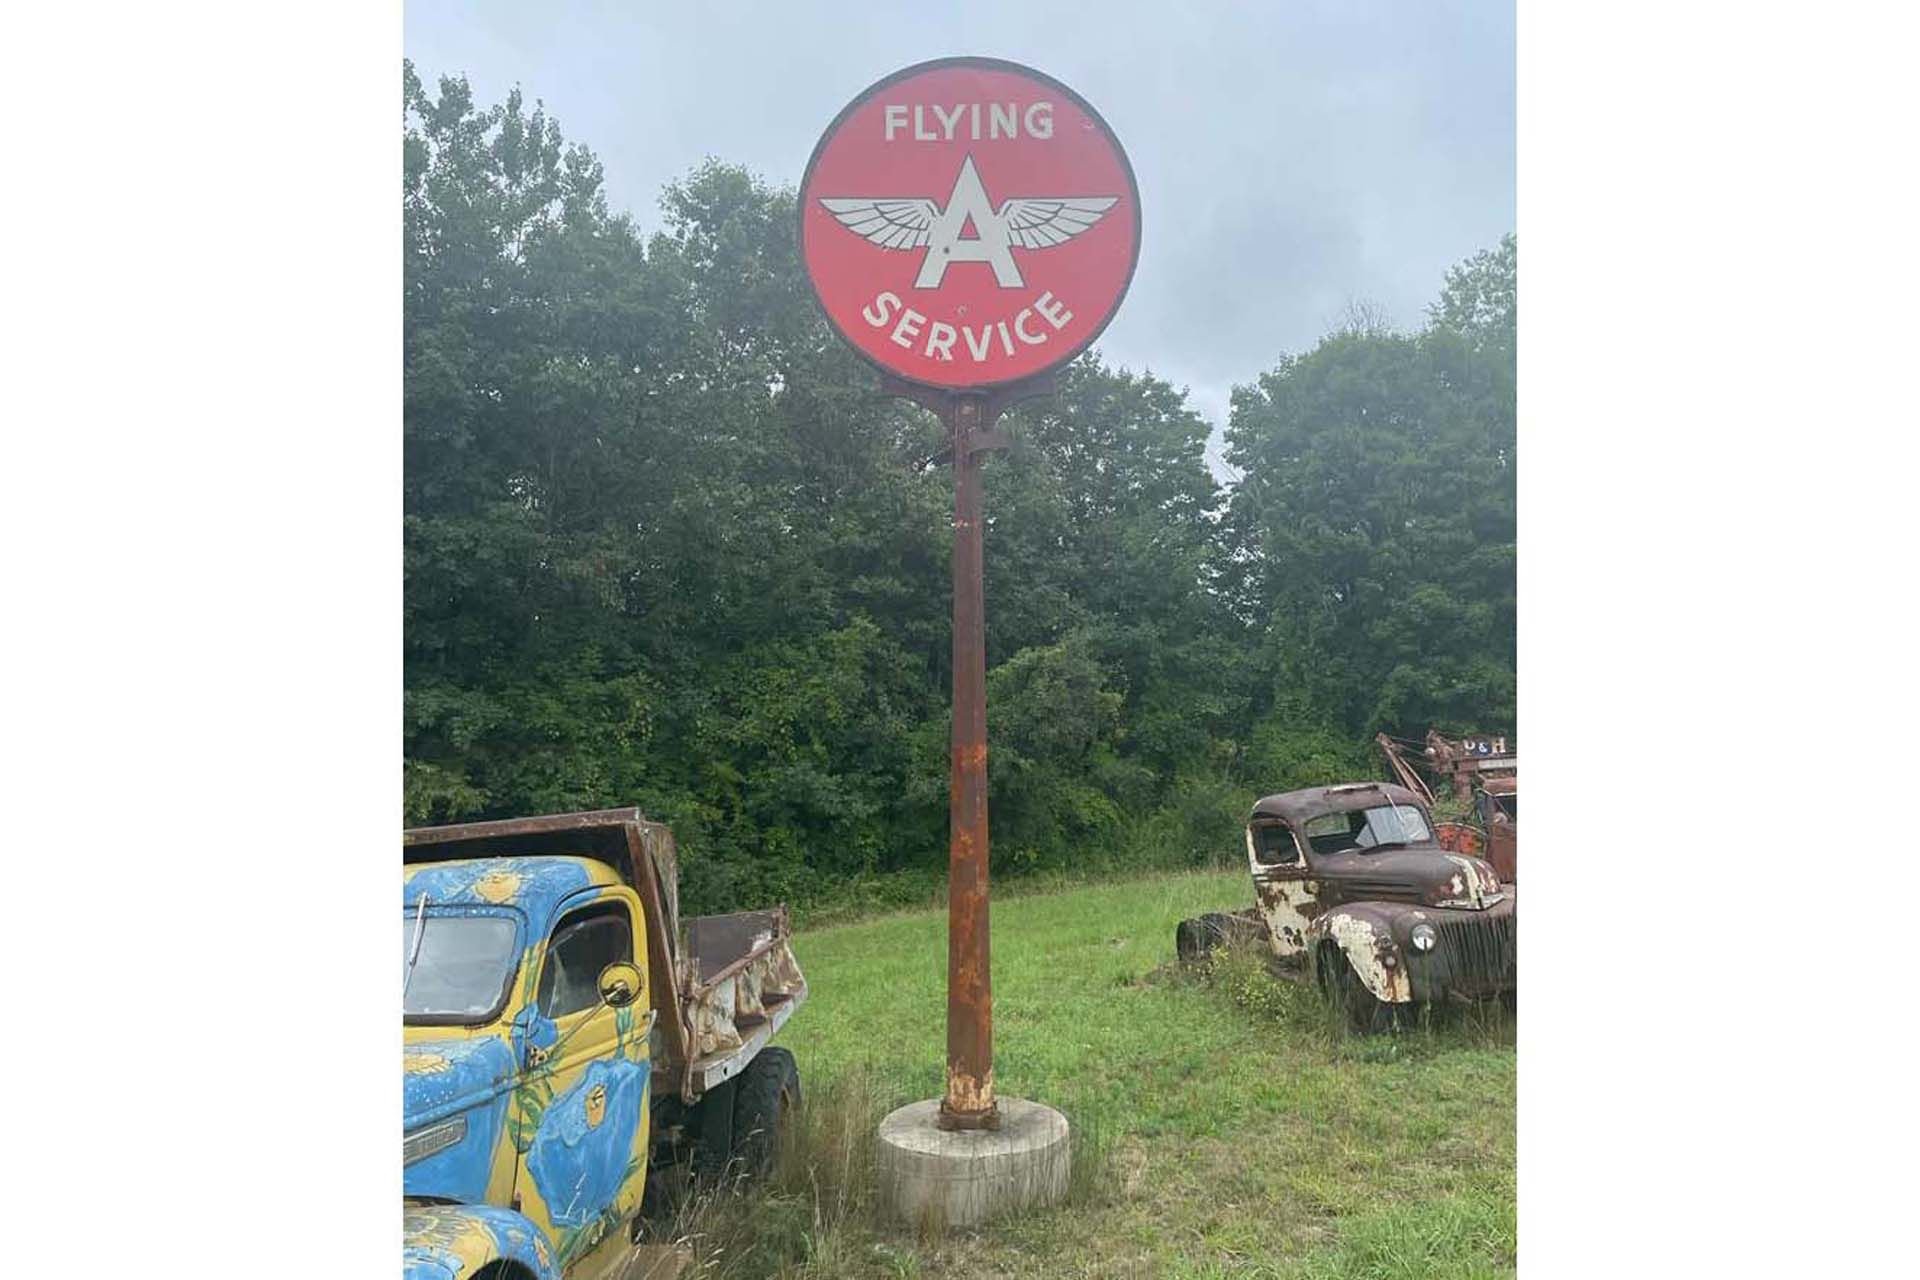 Broad Arrow Auctions | Very Large Flying A Service Station Double-Sided Porcelain Sign